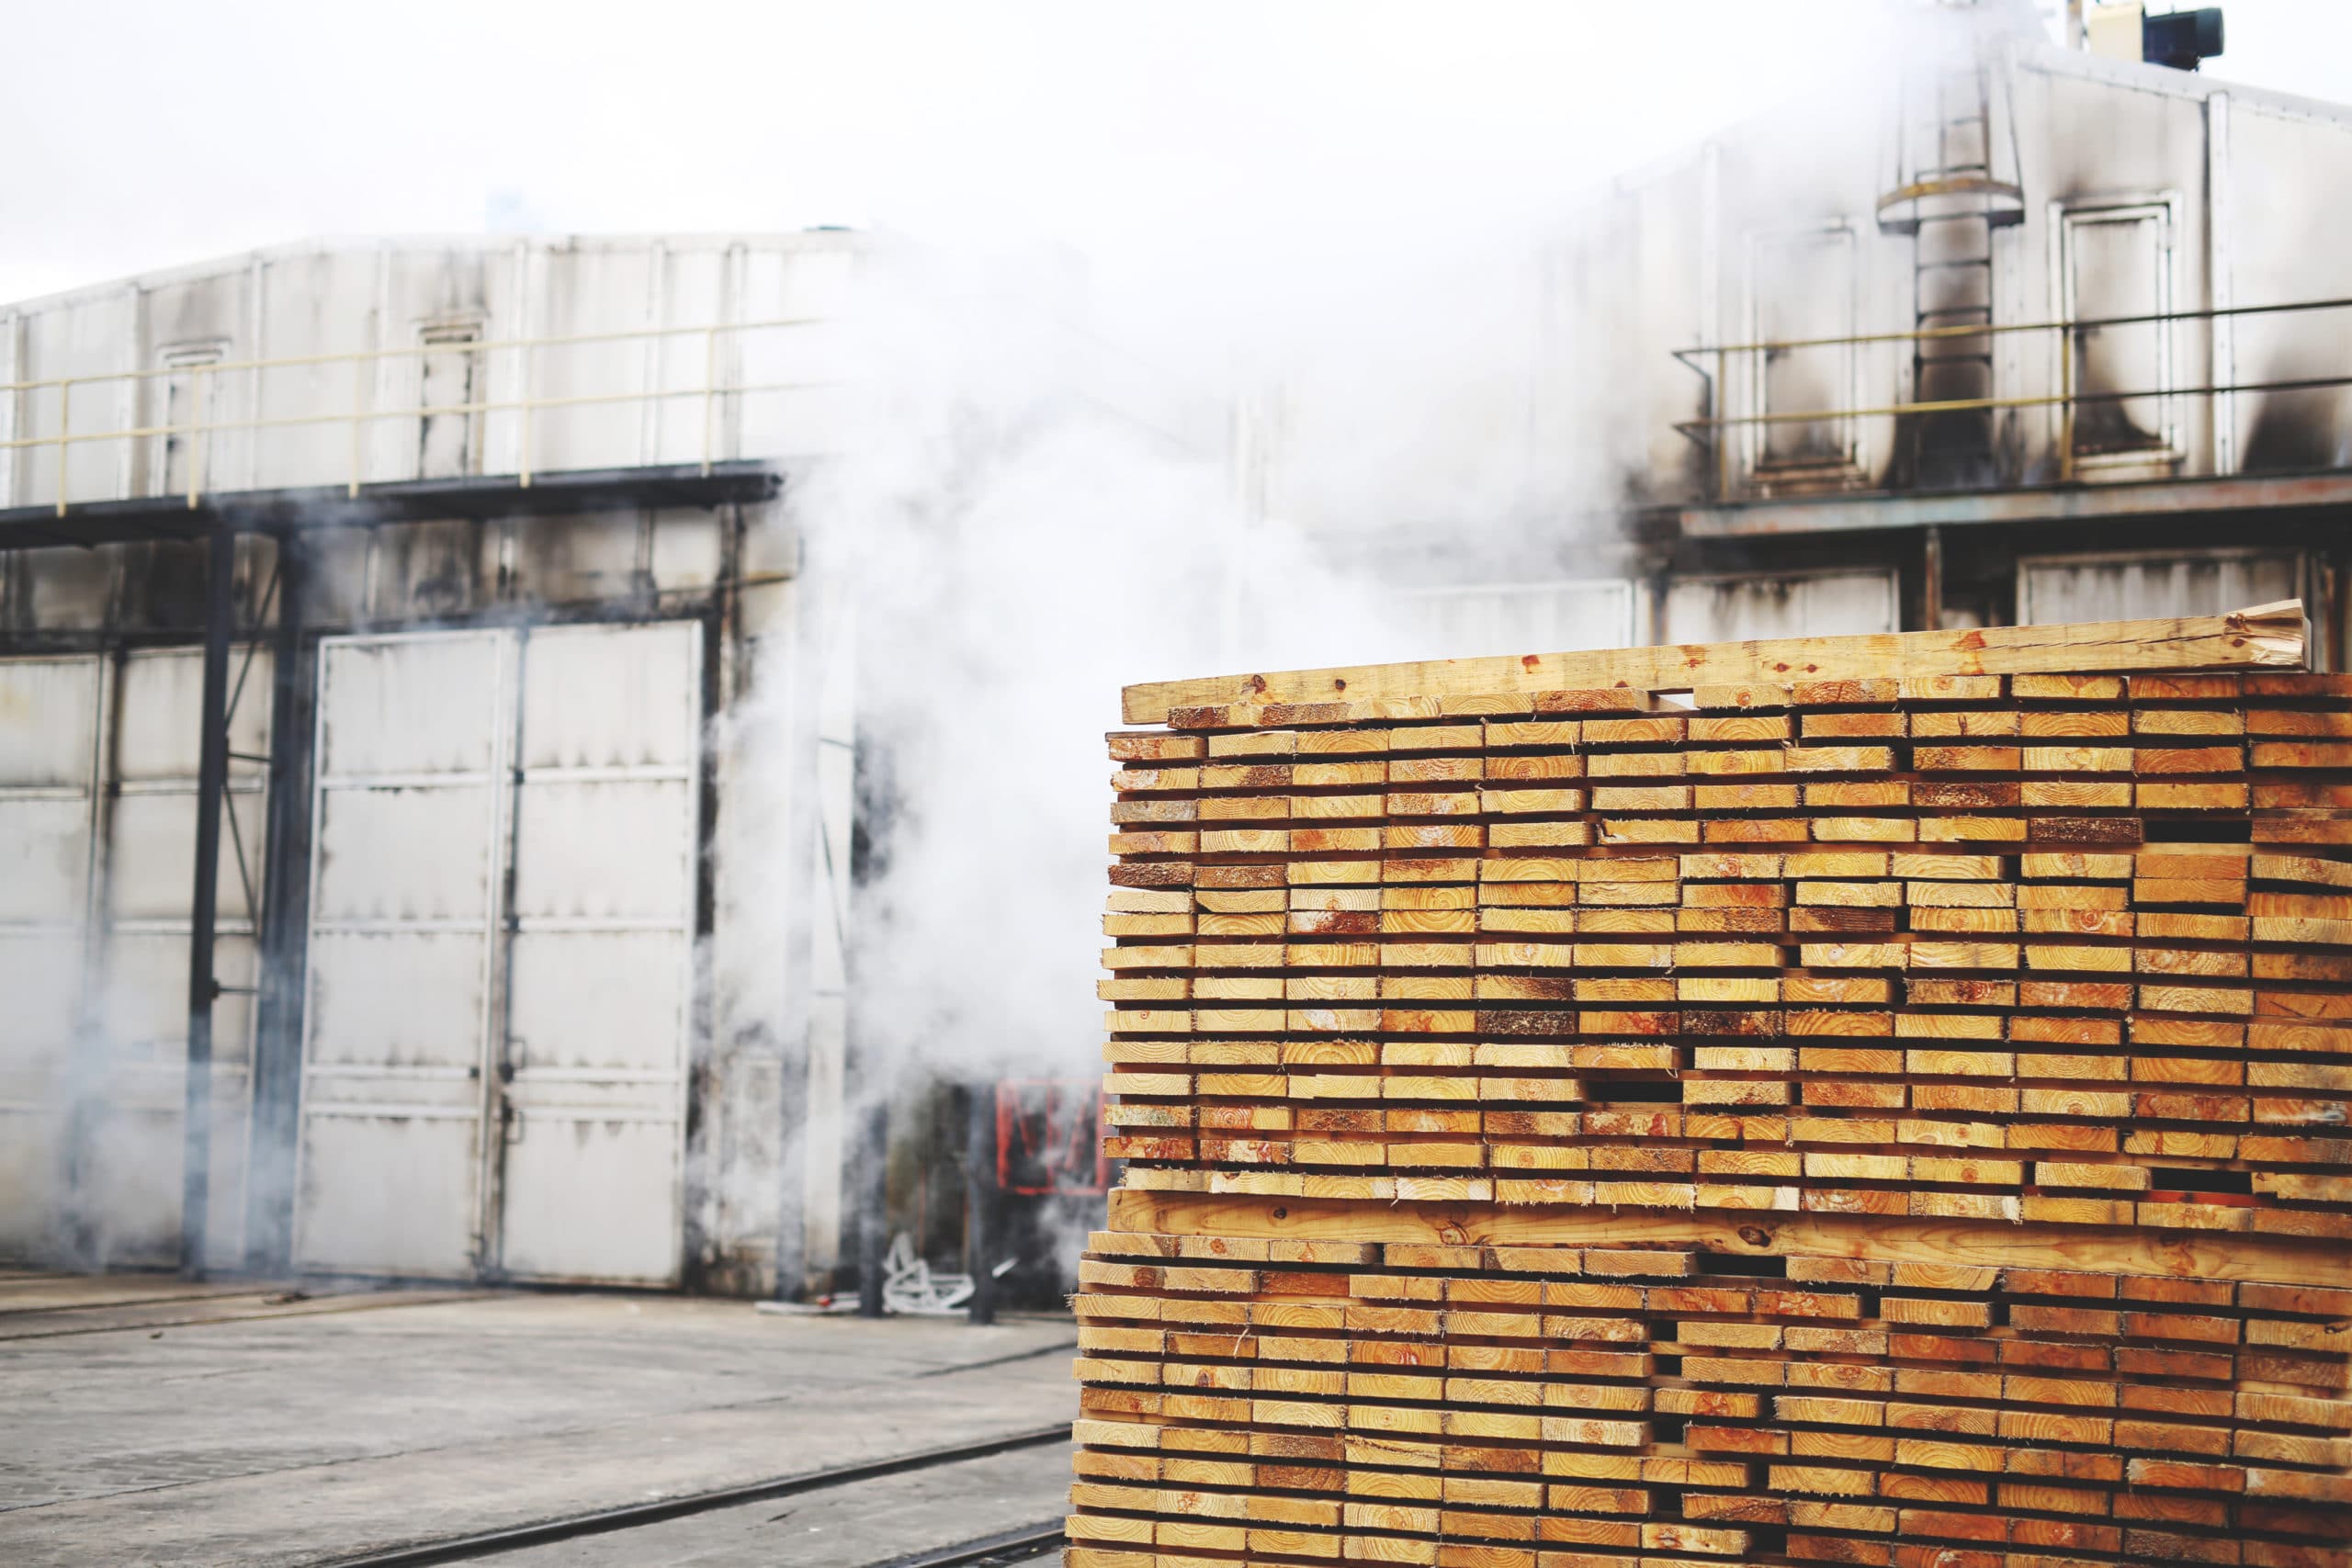 Looking to Lumber for a Sustainable Future